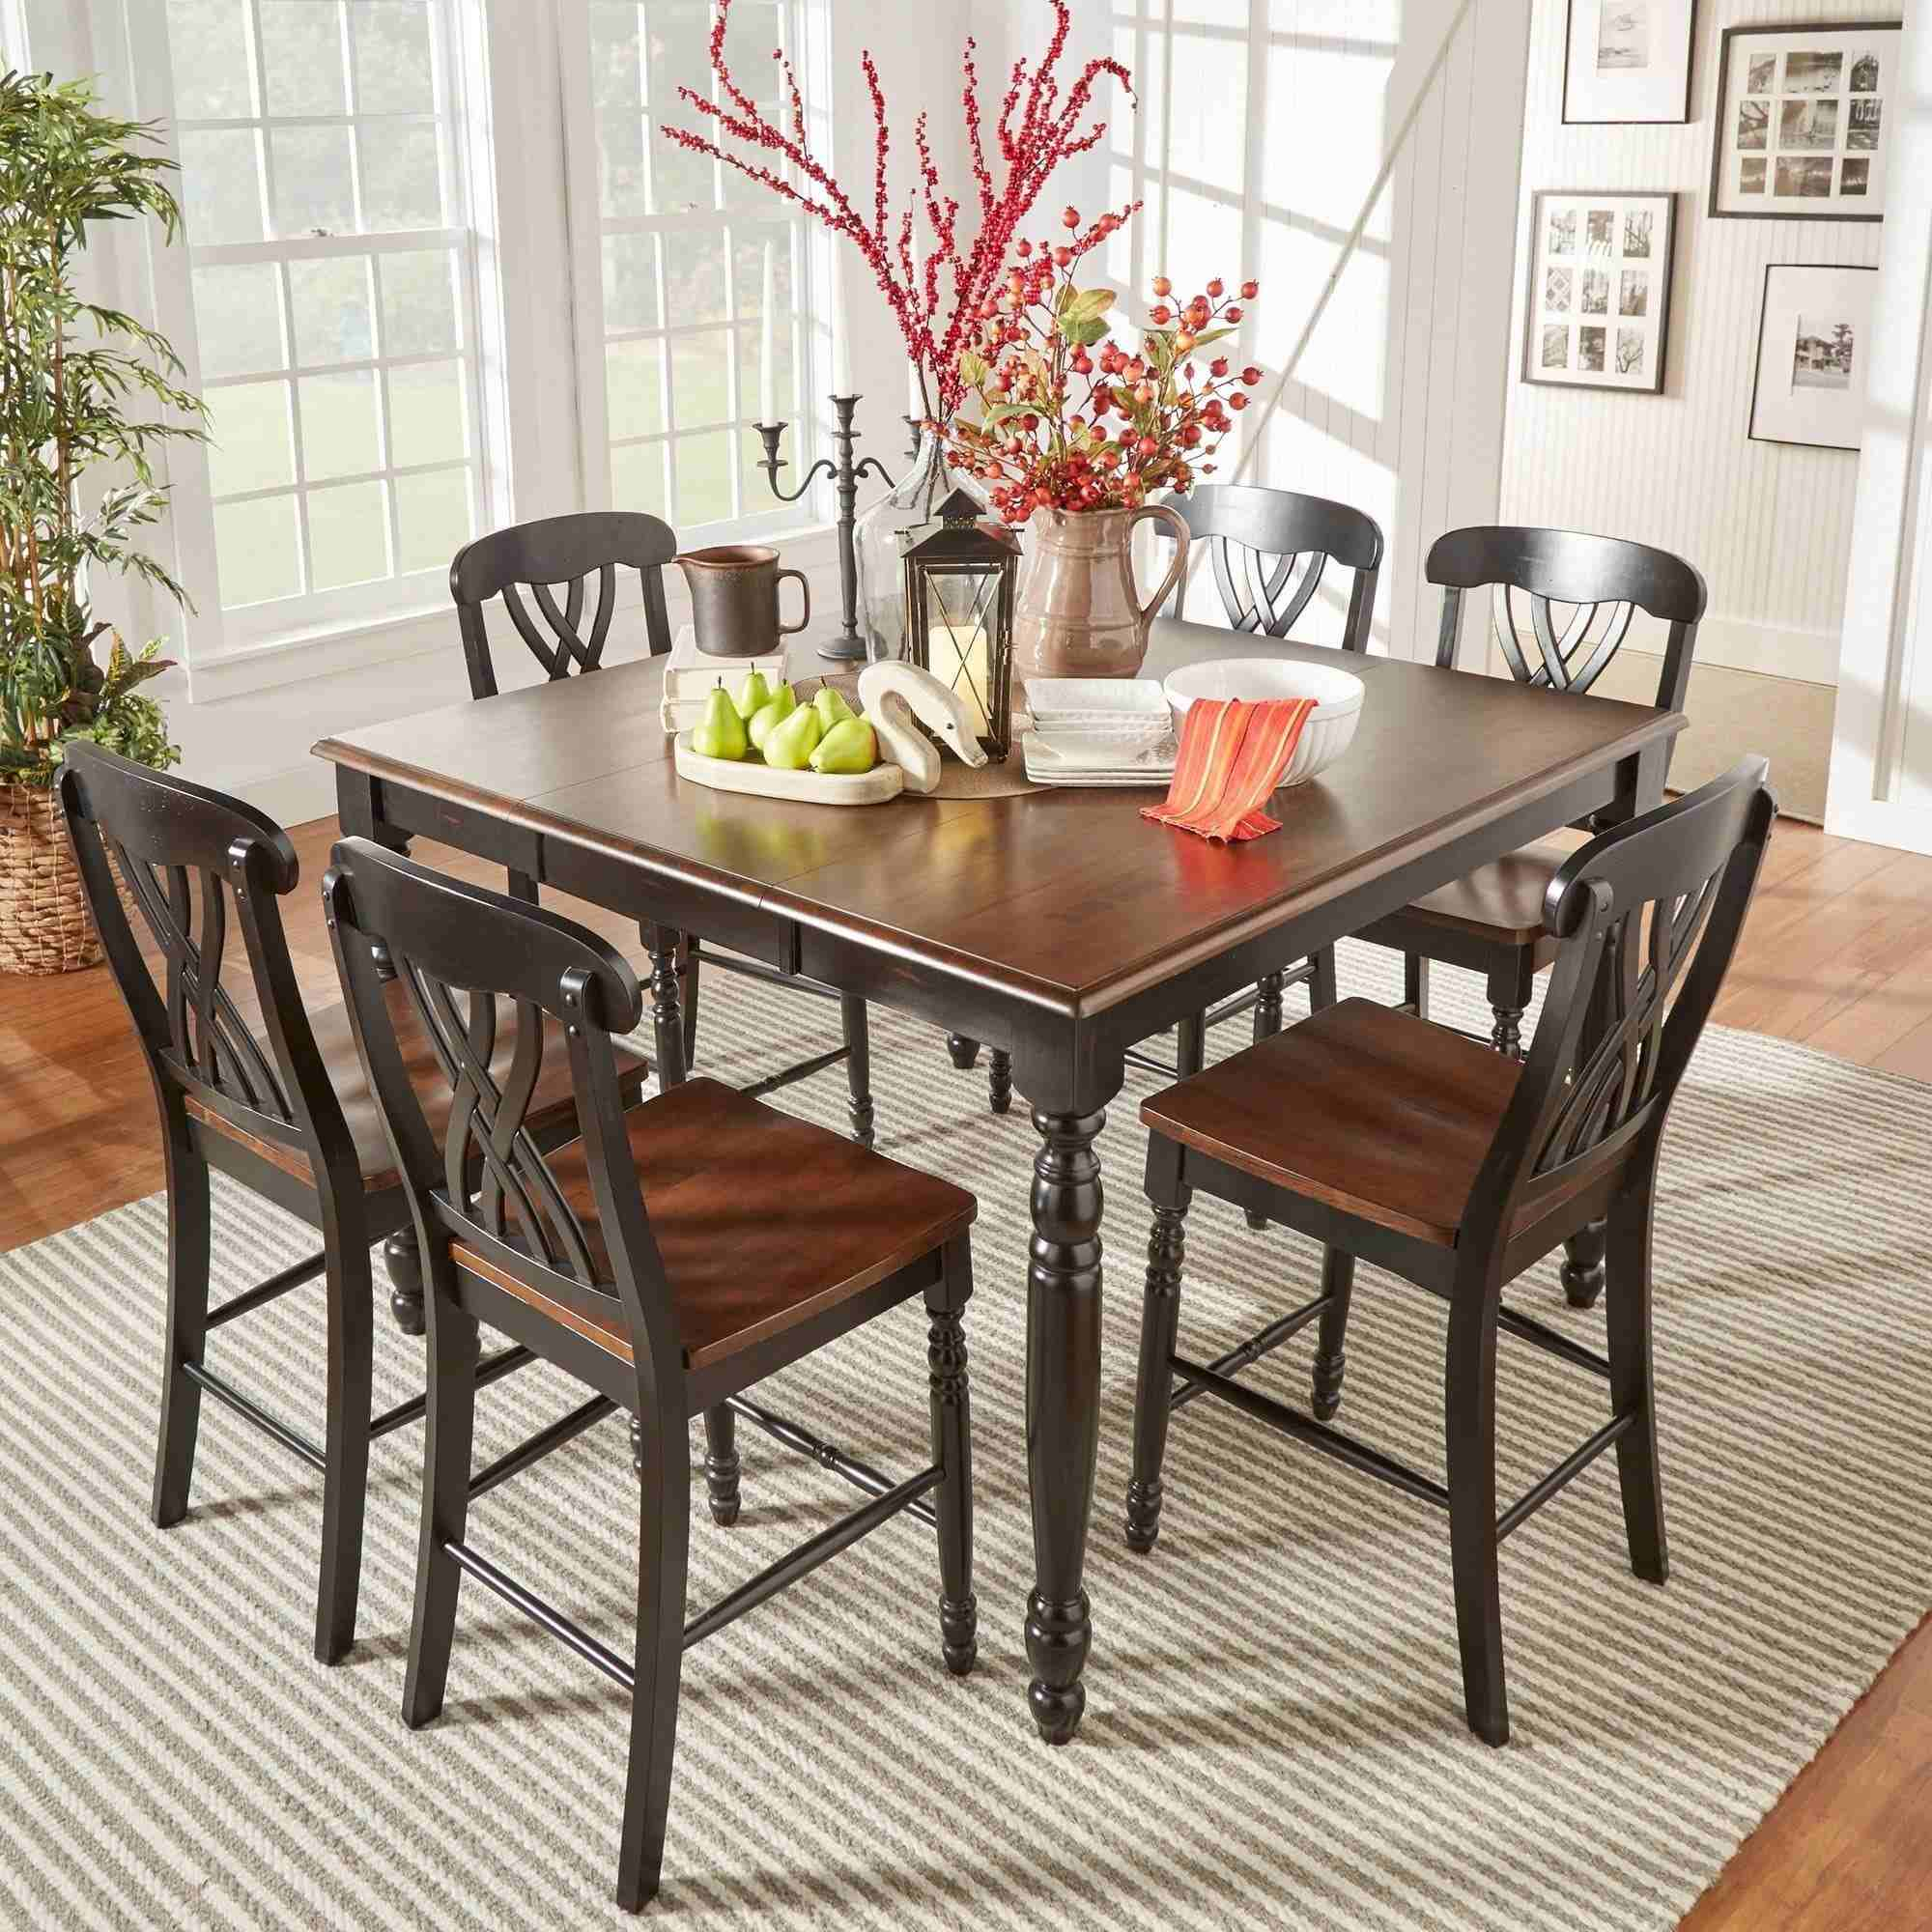 Dining Room Chairs Kijiji Calgary 2019 Home Design within measurements 2000 X 2000